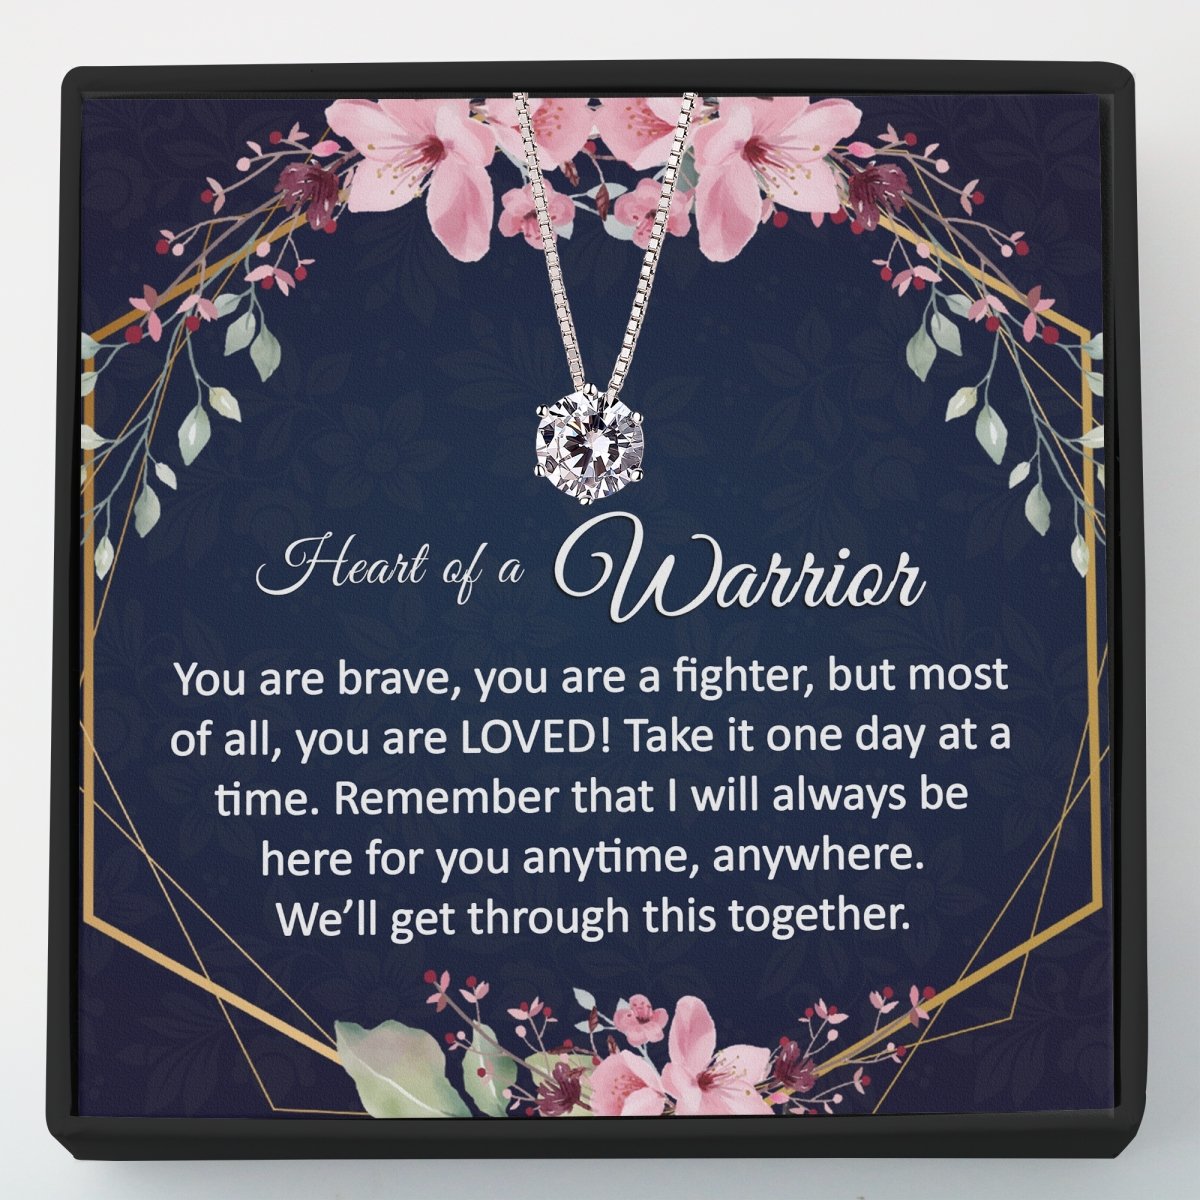 Divorce Break up Encouragement Gift, Silver CZ Necklace - Meaningful Cards